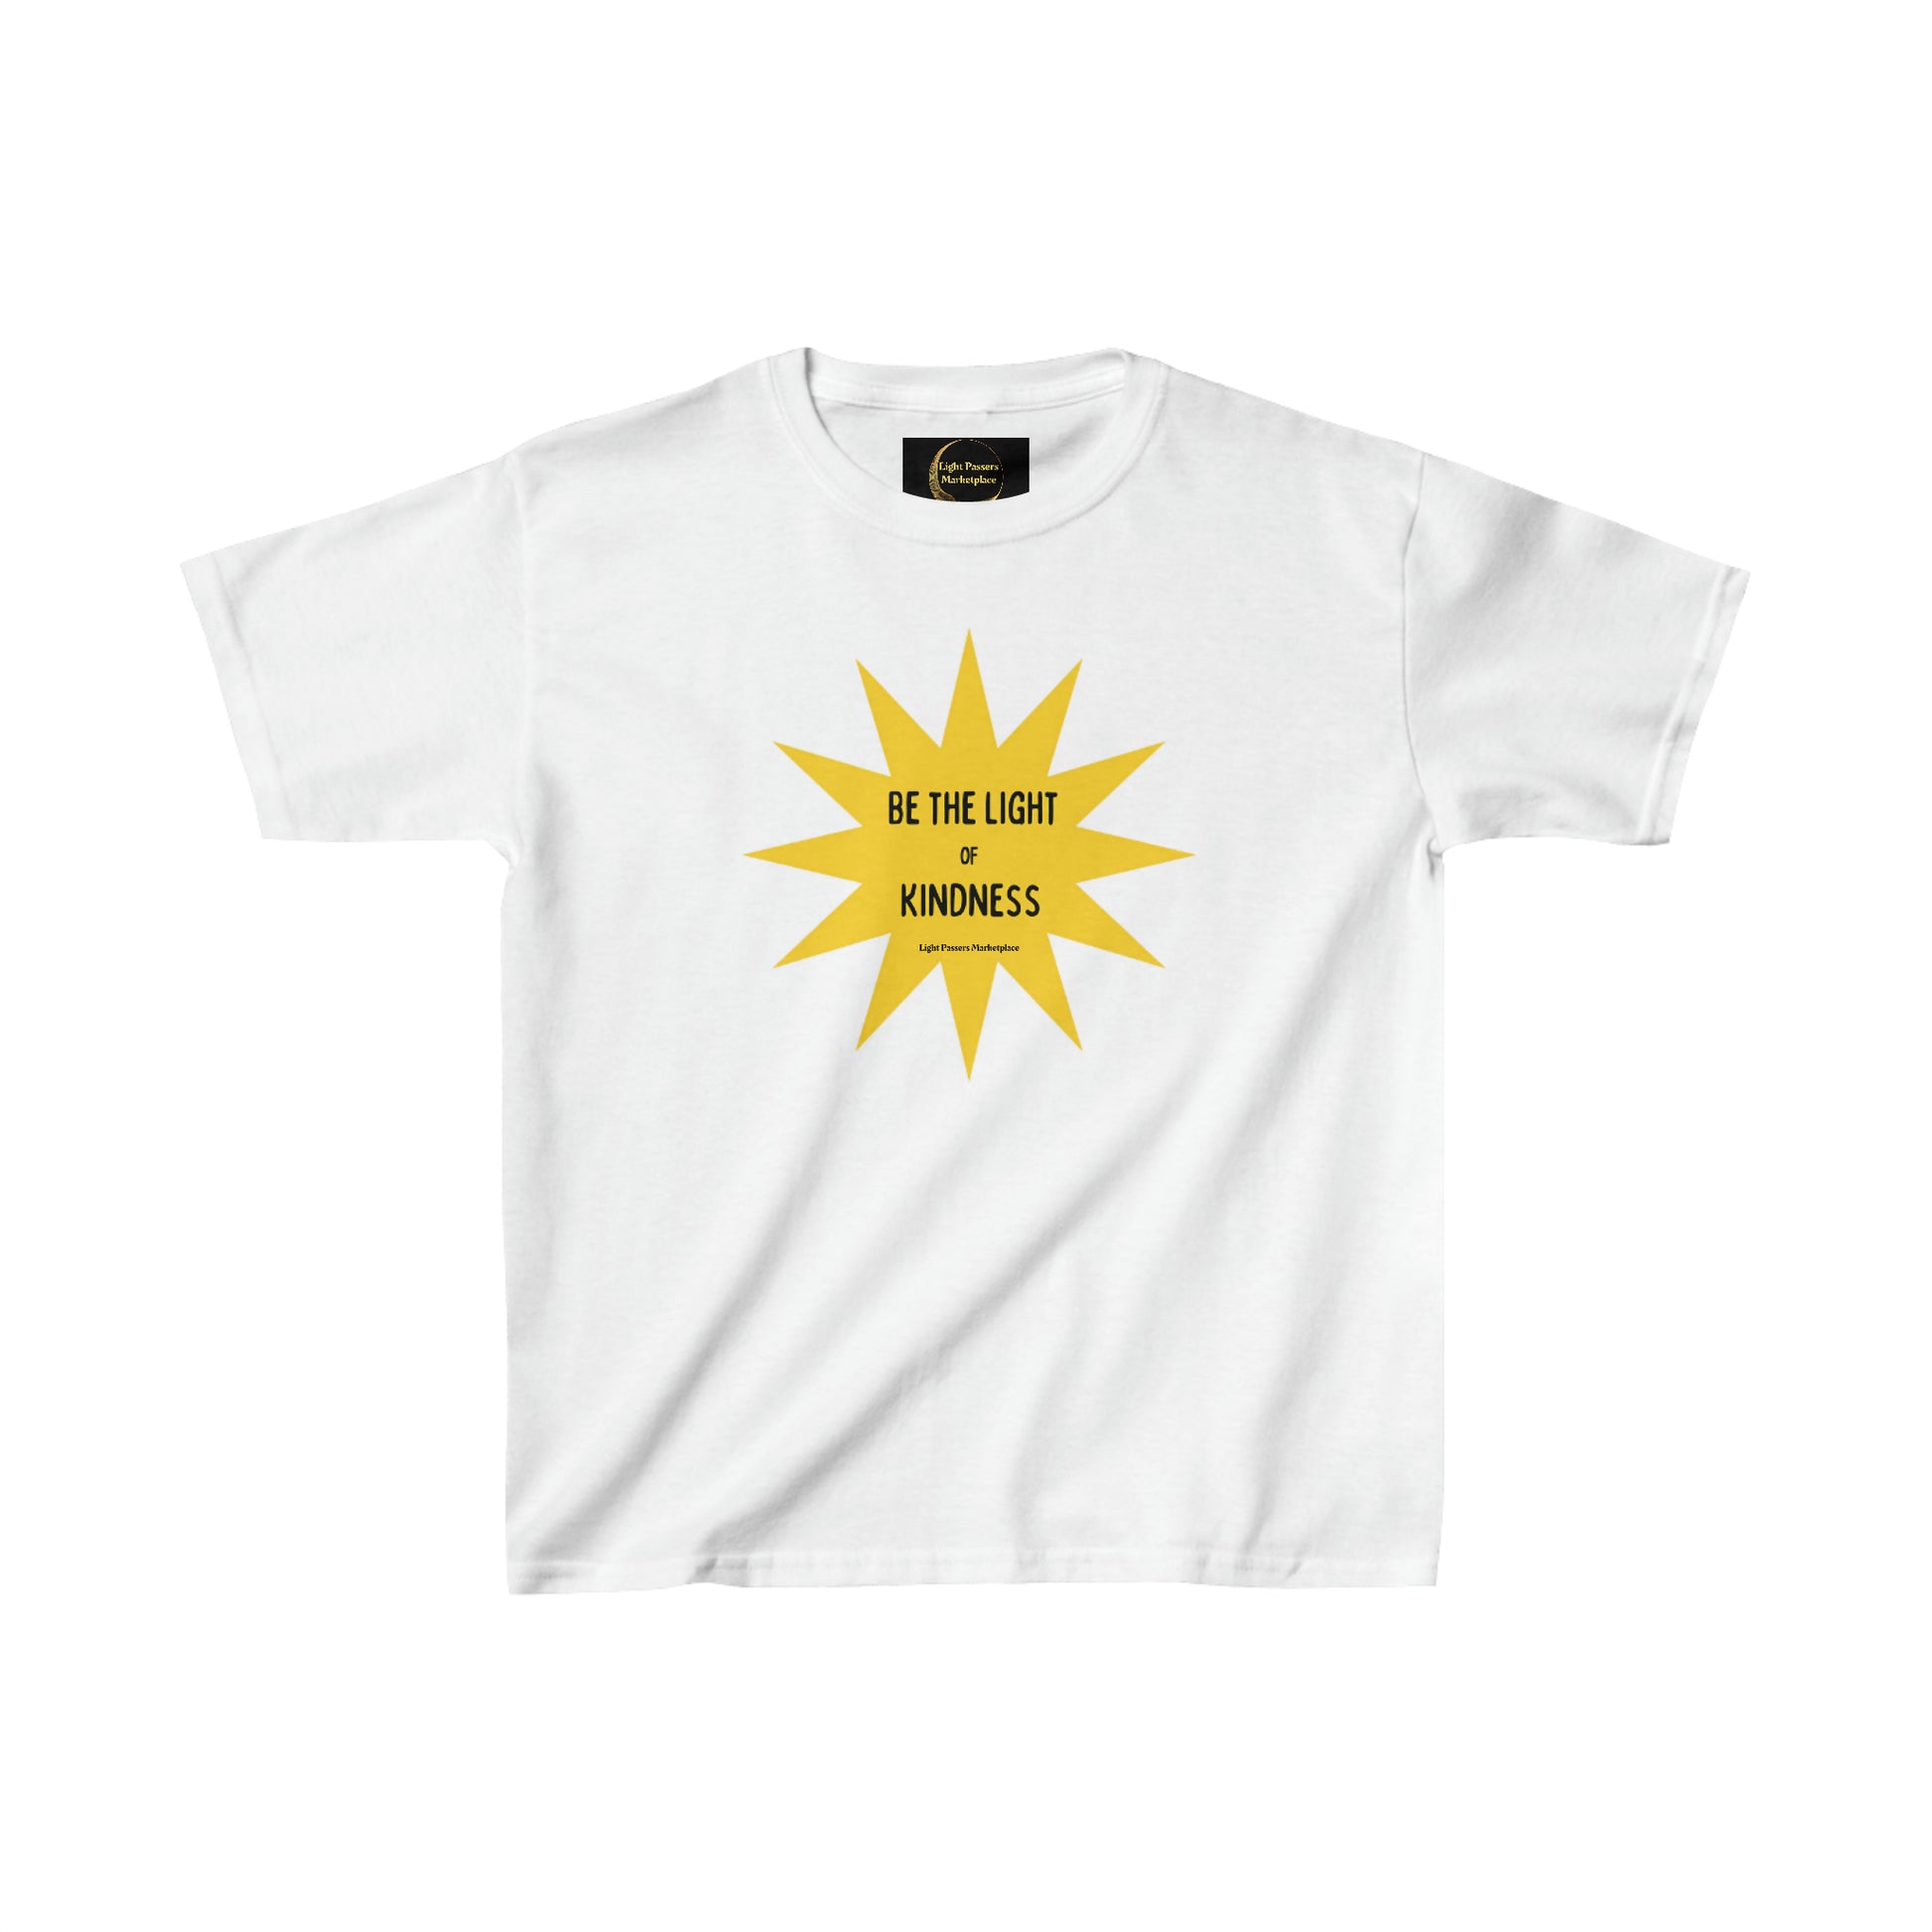 Youth cotton tee featuring a yellow star and sun design. Made of 100% cotton for solid colors, with twill tape shoulders for durability and ribbed collar for curl resistance. Ideal for everyday wear.